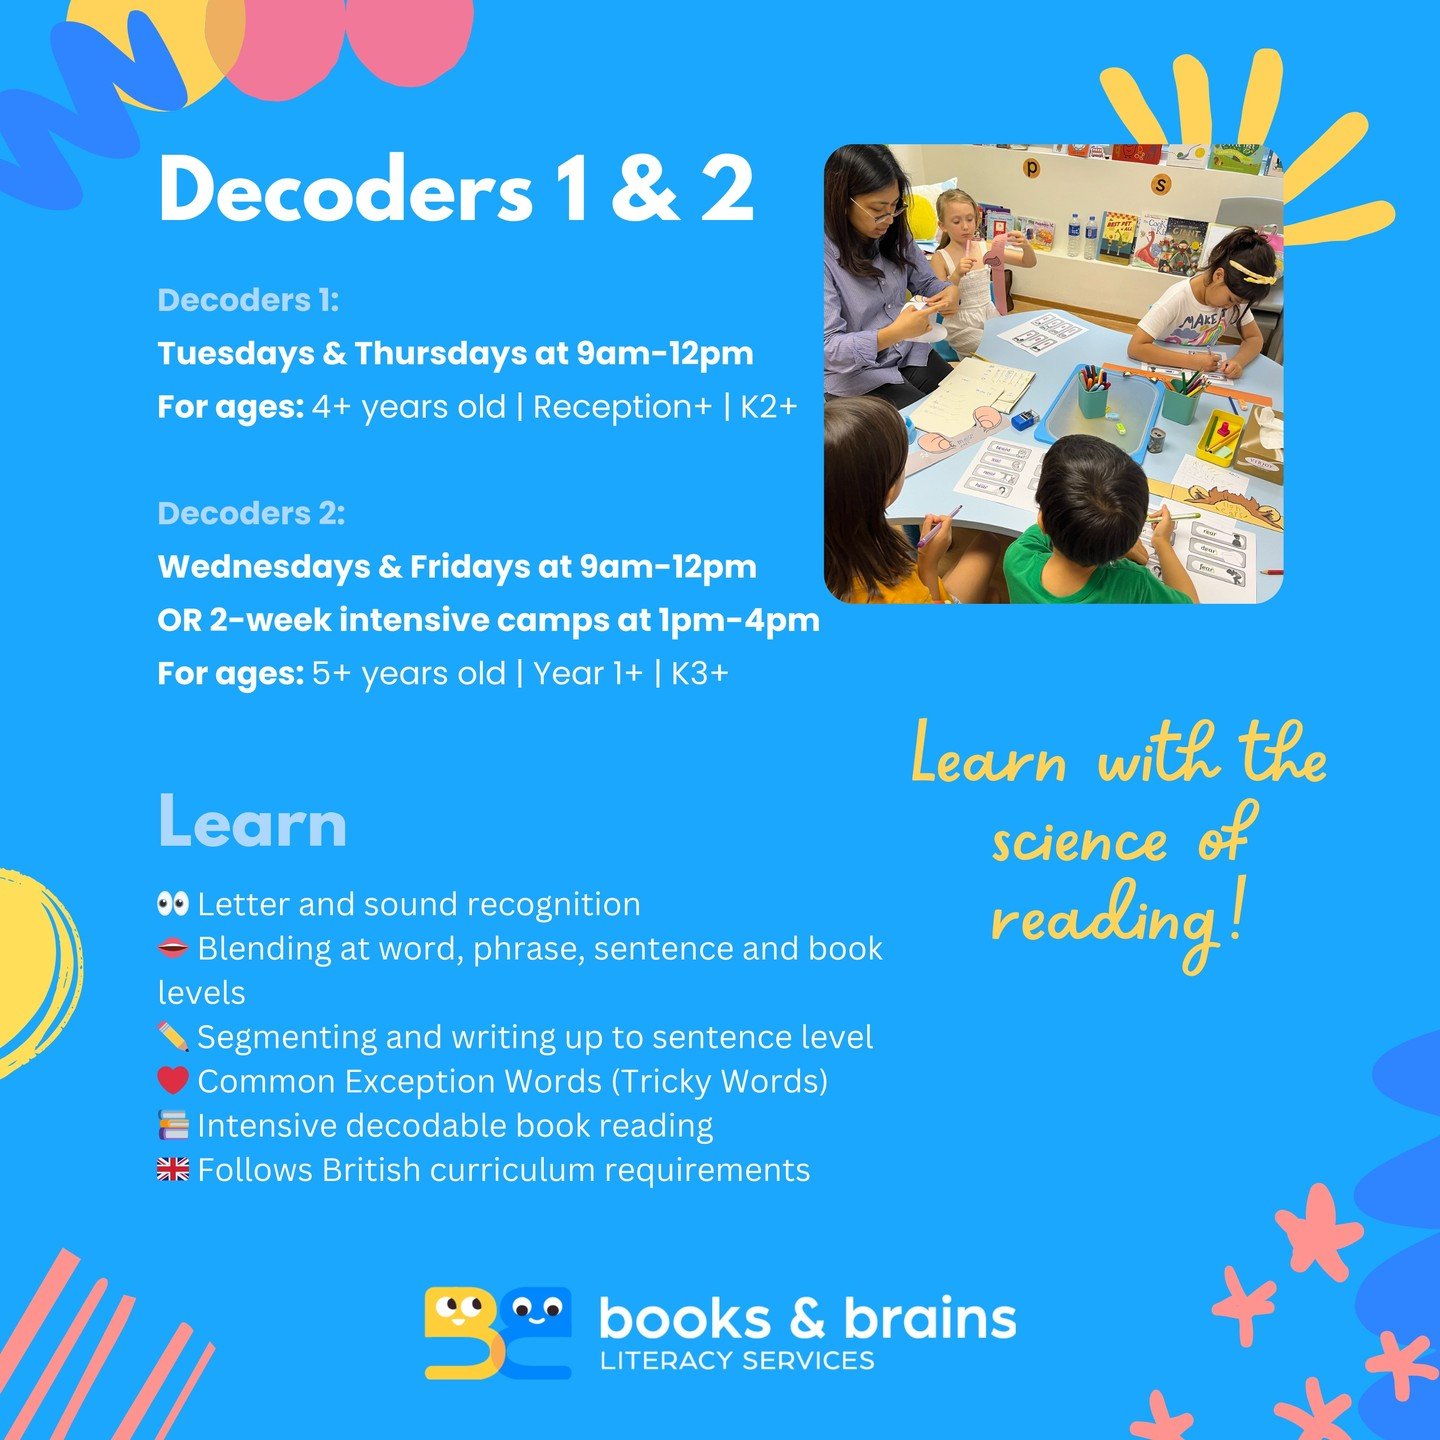 What you can expect in our Decoders 1 &amp; 2 Summer Programmes! 

Chat with us via Whatsapp to sign up or find more details through the website via link in bio @booksandbrainshk

💯Reading and Writing Skills = Confidence
🧠 Learning with the Science